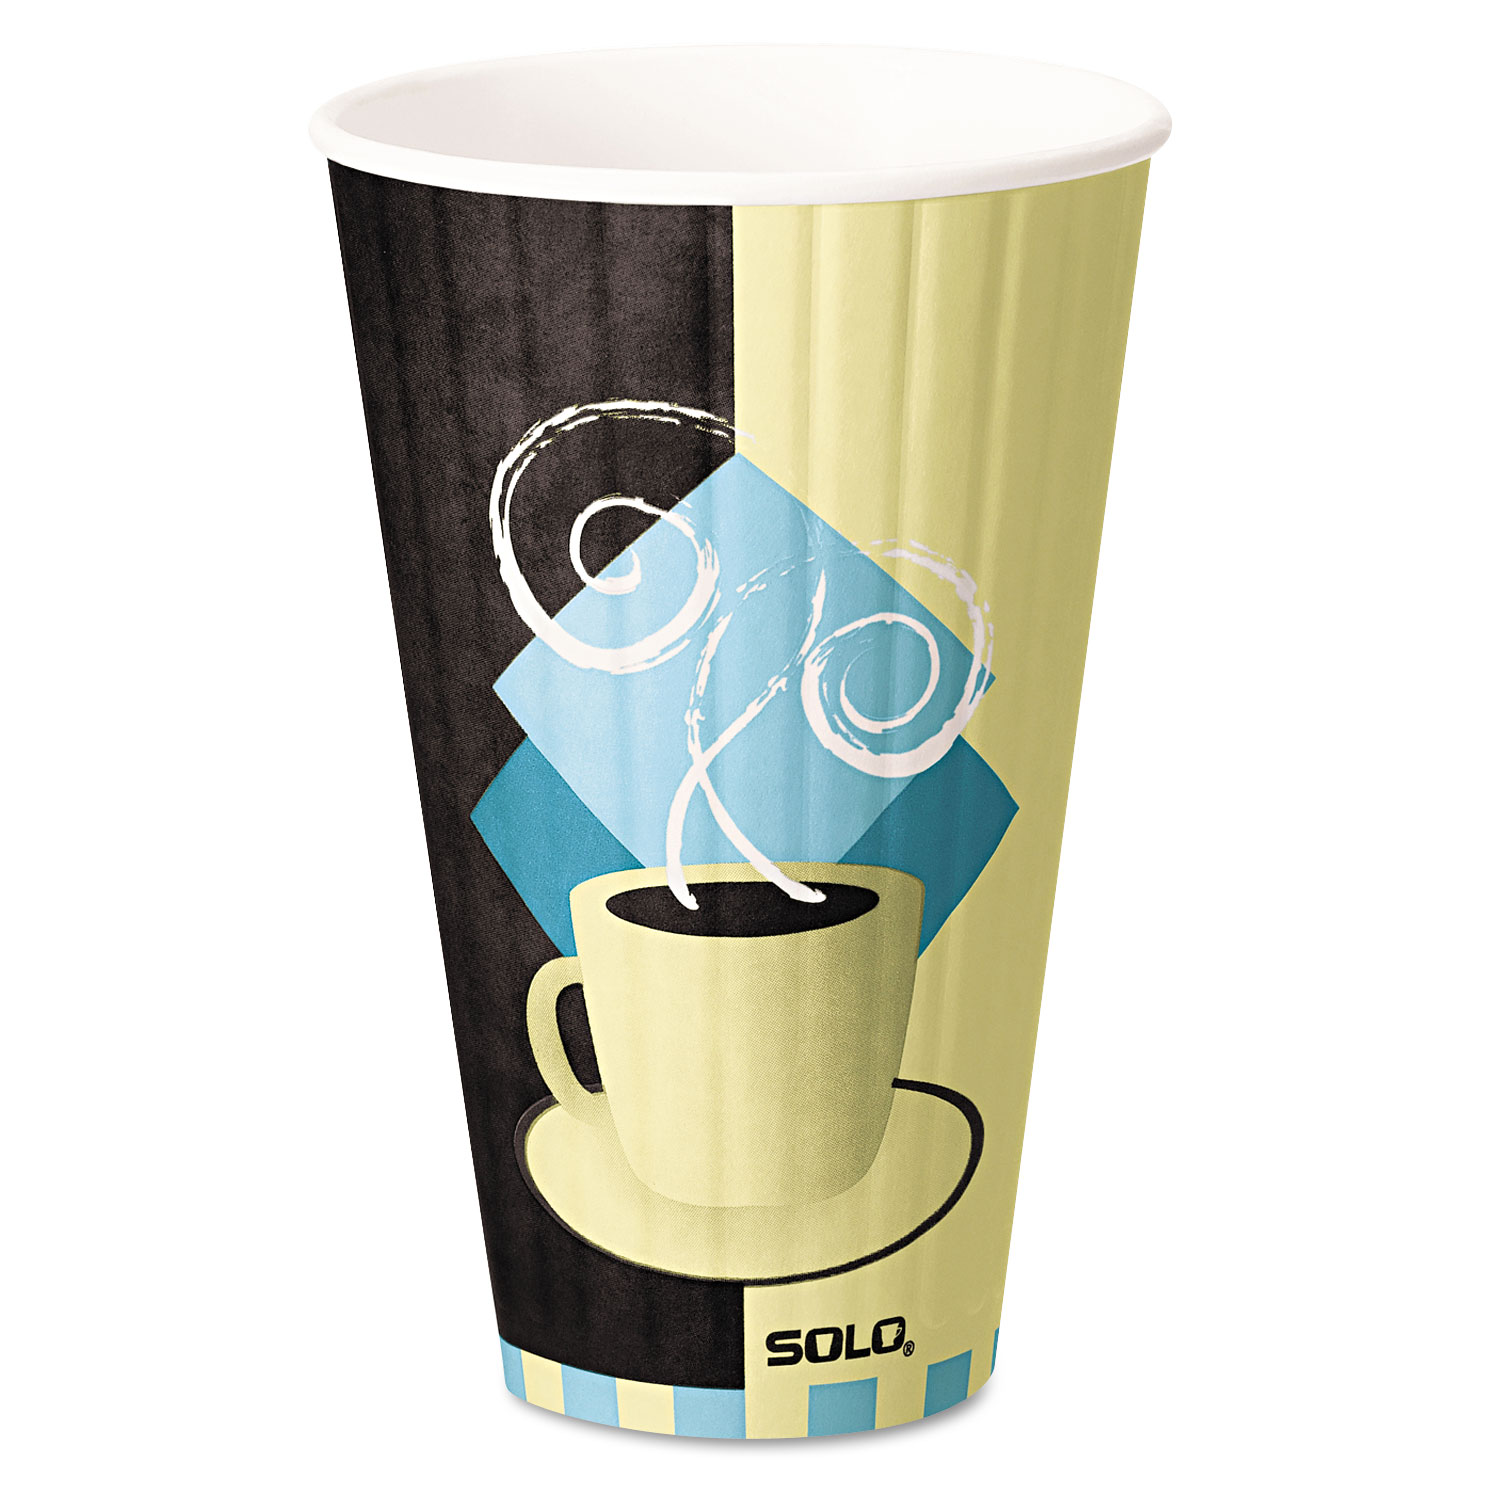  Dart IC20-J7534 Duo Shield Insulated Paper Hot Cups, 20oz, Tuscan, Chocolate/Blue/Beige, 350/Ct (SCCIC20J7534) 